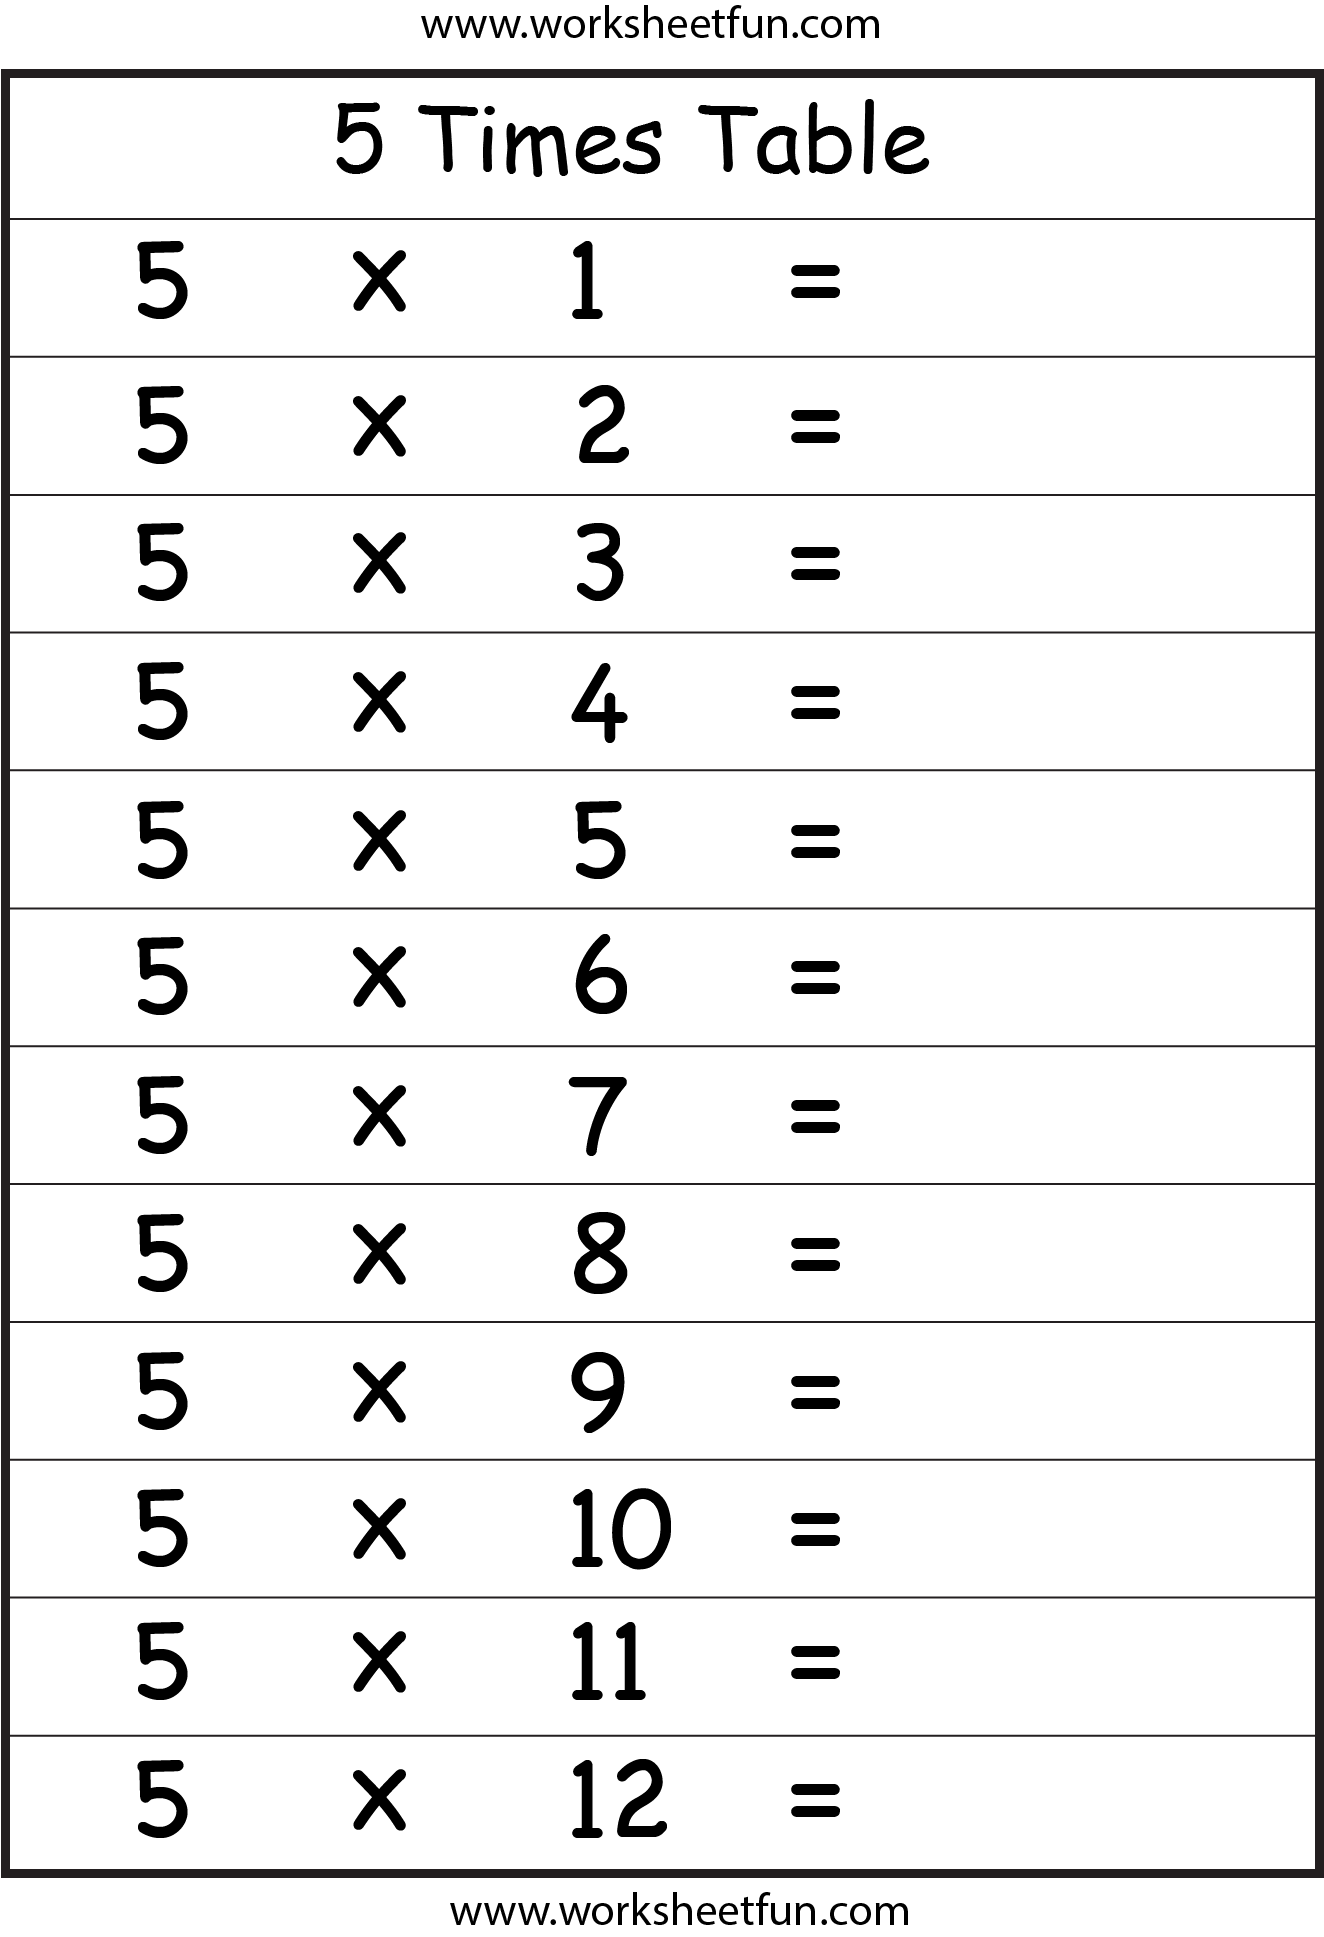 multiplication-times-tables-worksheets-2-3-4-5-6-7-8-9-10-11-12-times-tables